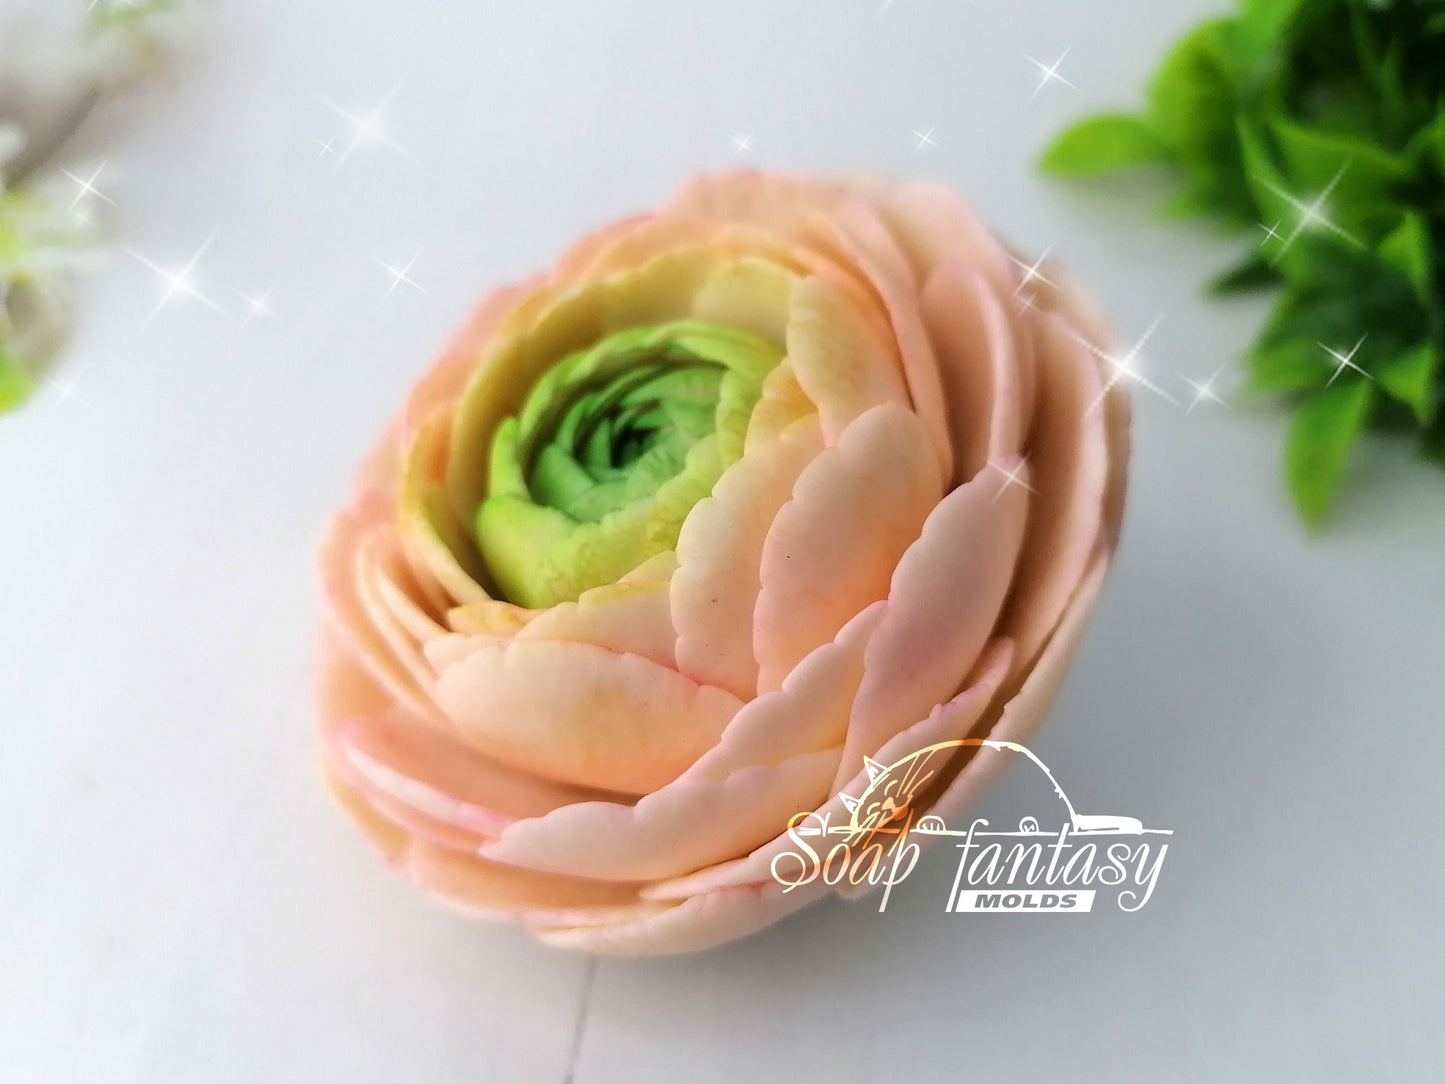 Ranunculus "Amandine" flower silicone mold for soap making